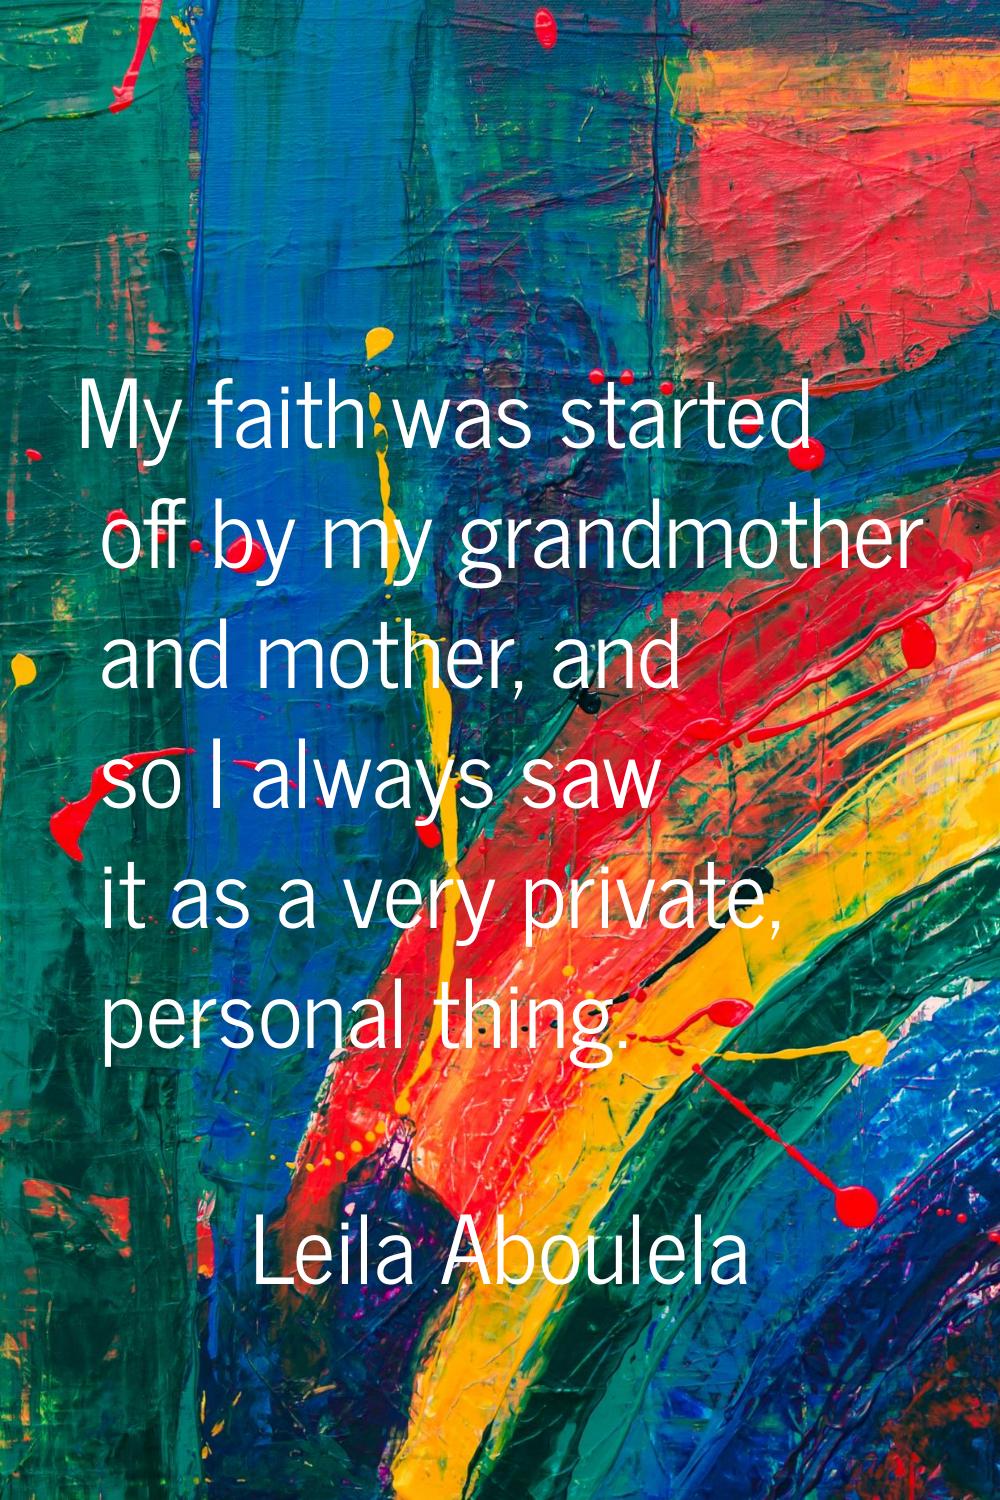 My faith was started off by my grandmother and mother, and so I always saw it as a very private, pe